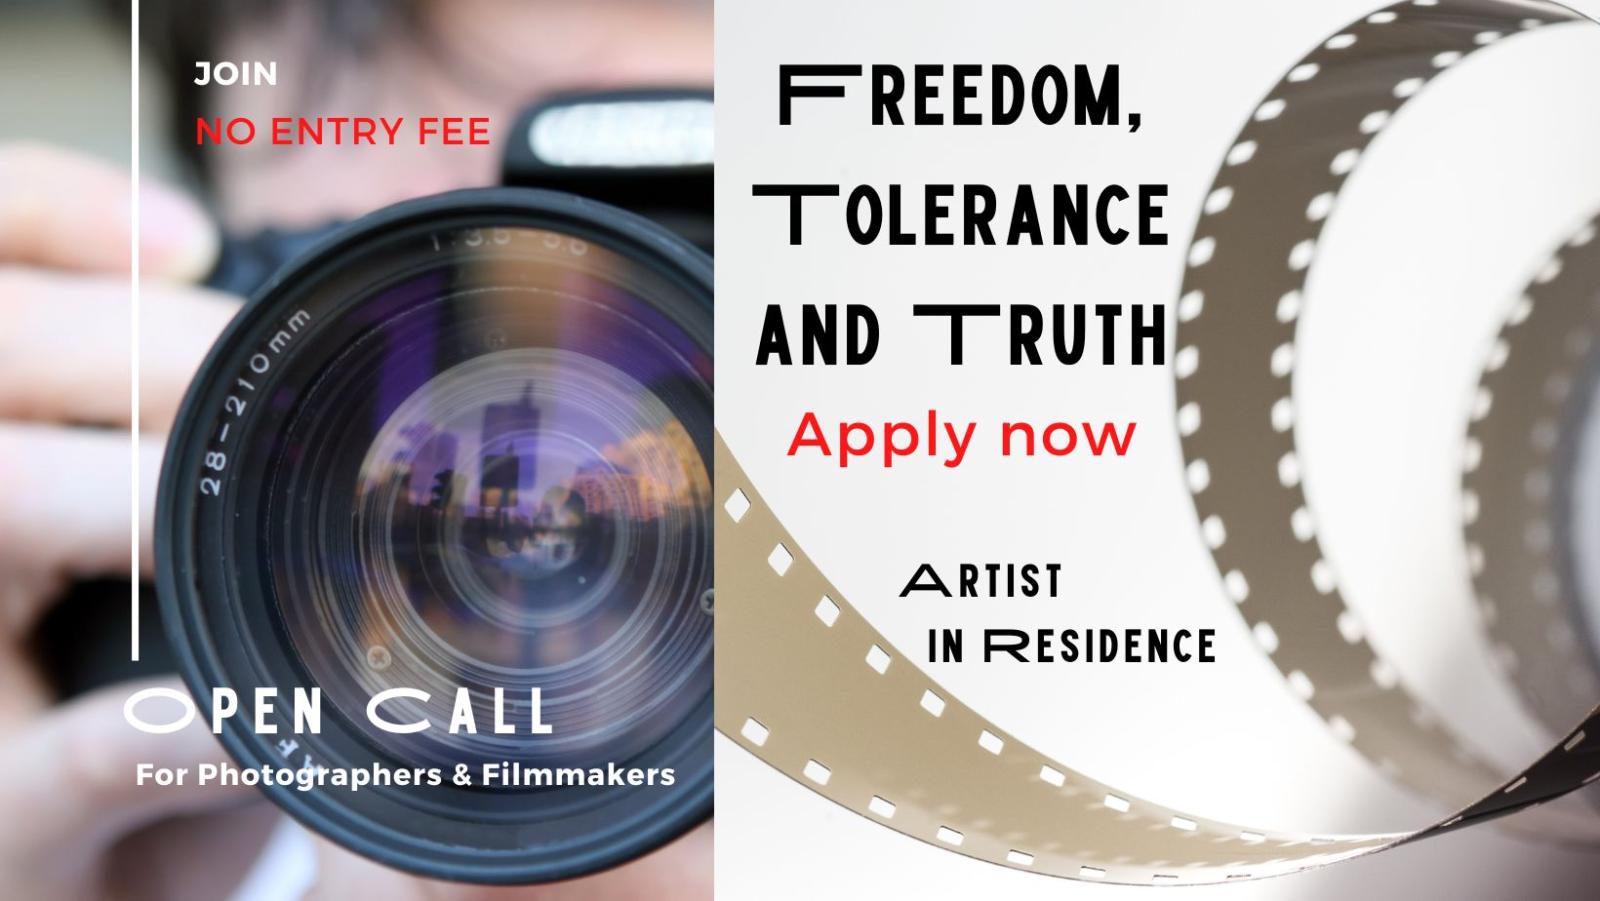 Freedom, Tolerance and Truth. Open Call for International Photographers & Filmmakers: Artist in Residence supported by Michael Nguyen, Editor-in-chief at Tagree